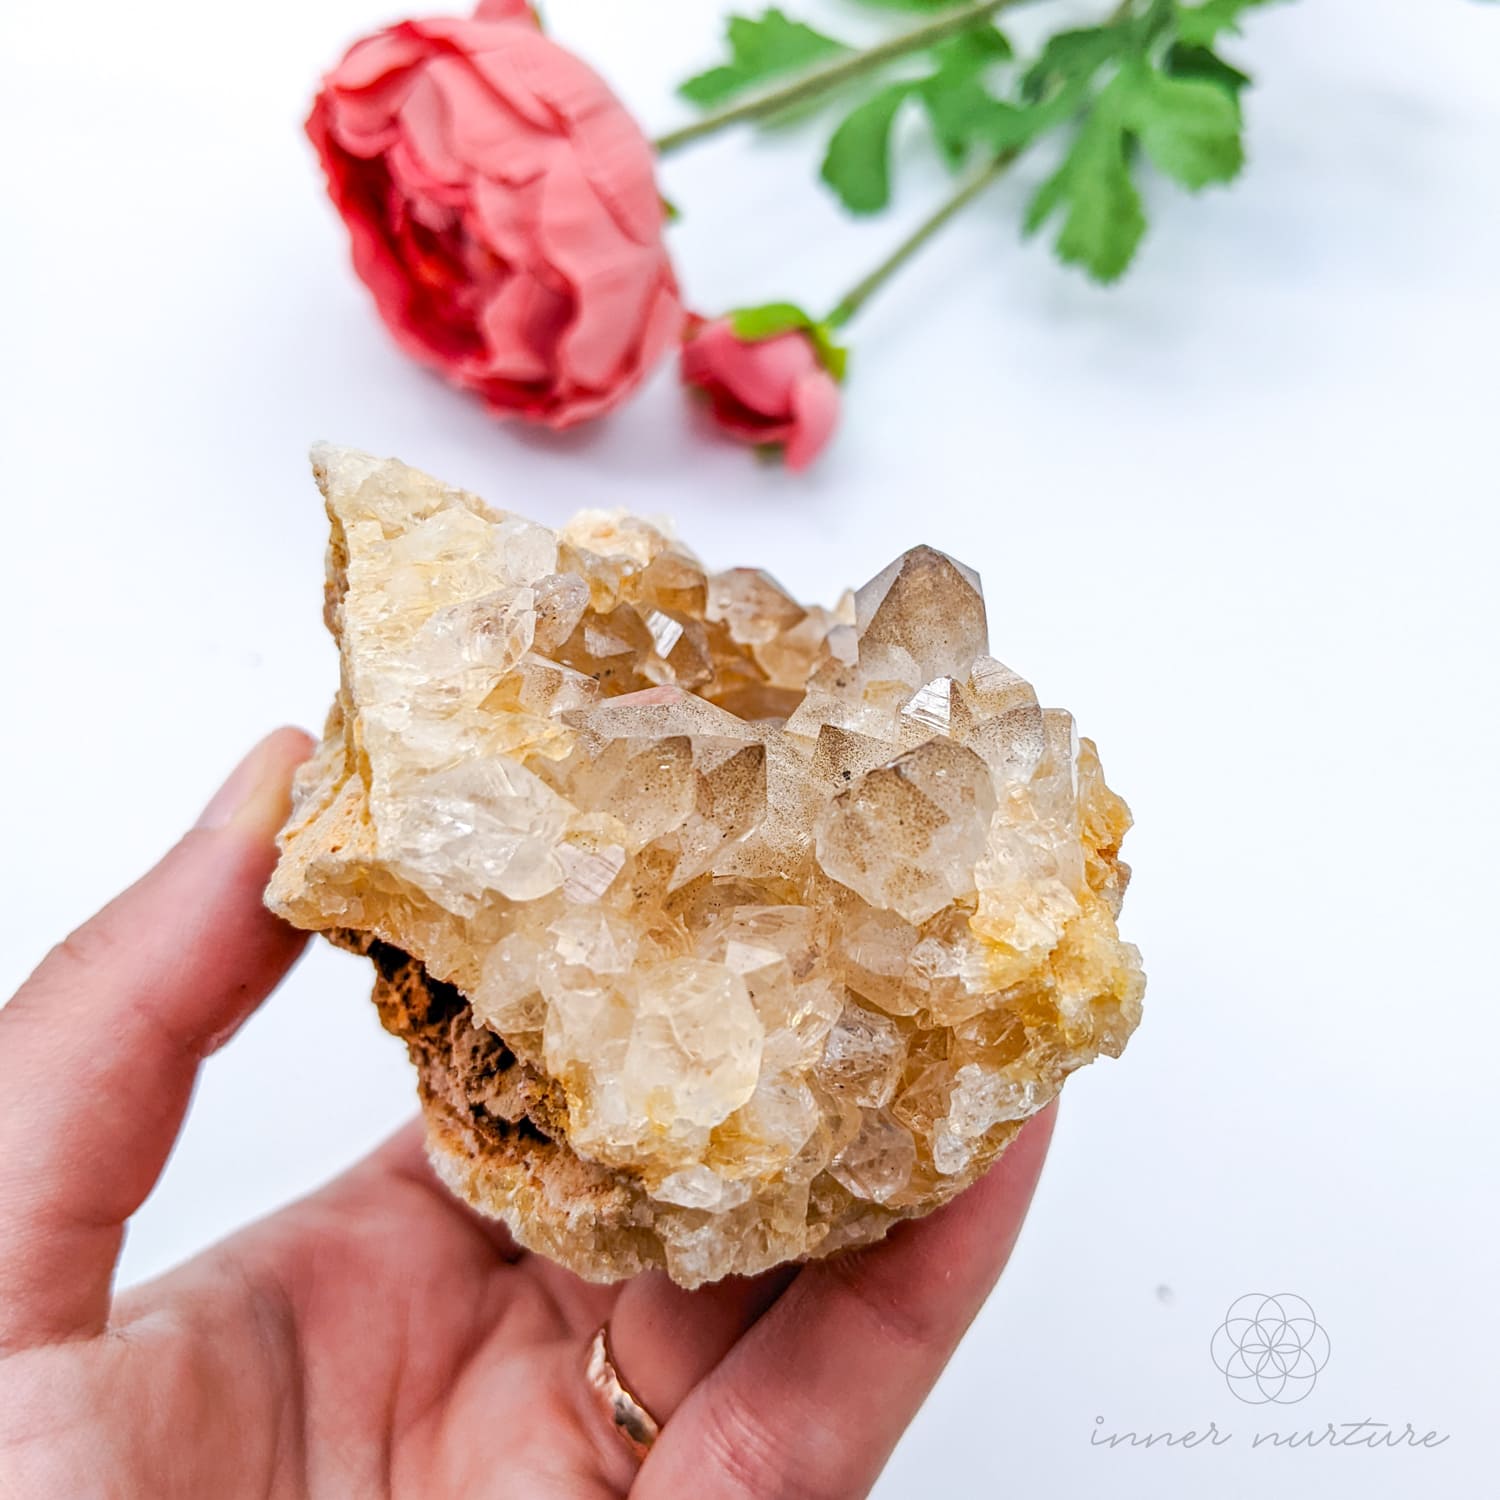 Clear Quartz Cluster With Inclusions - #16 | Crystal Shop Australia - Inner Nurture